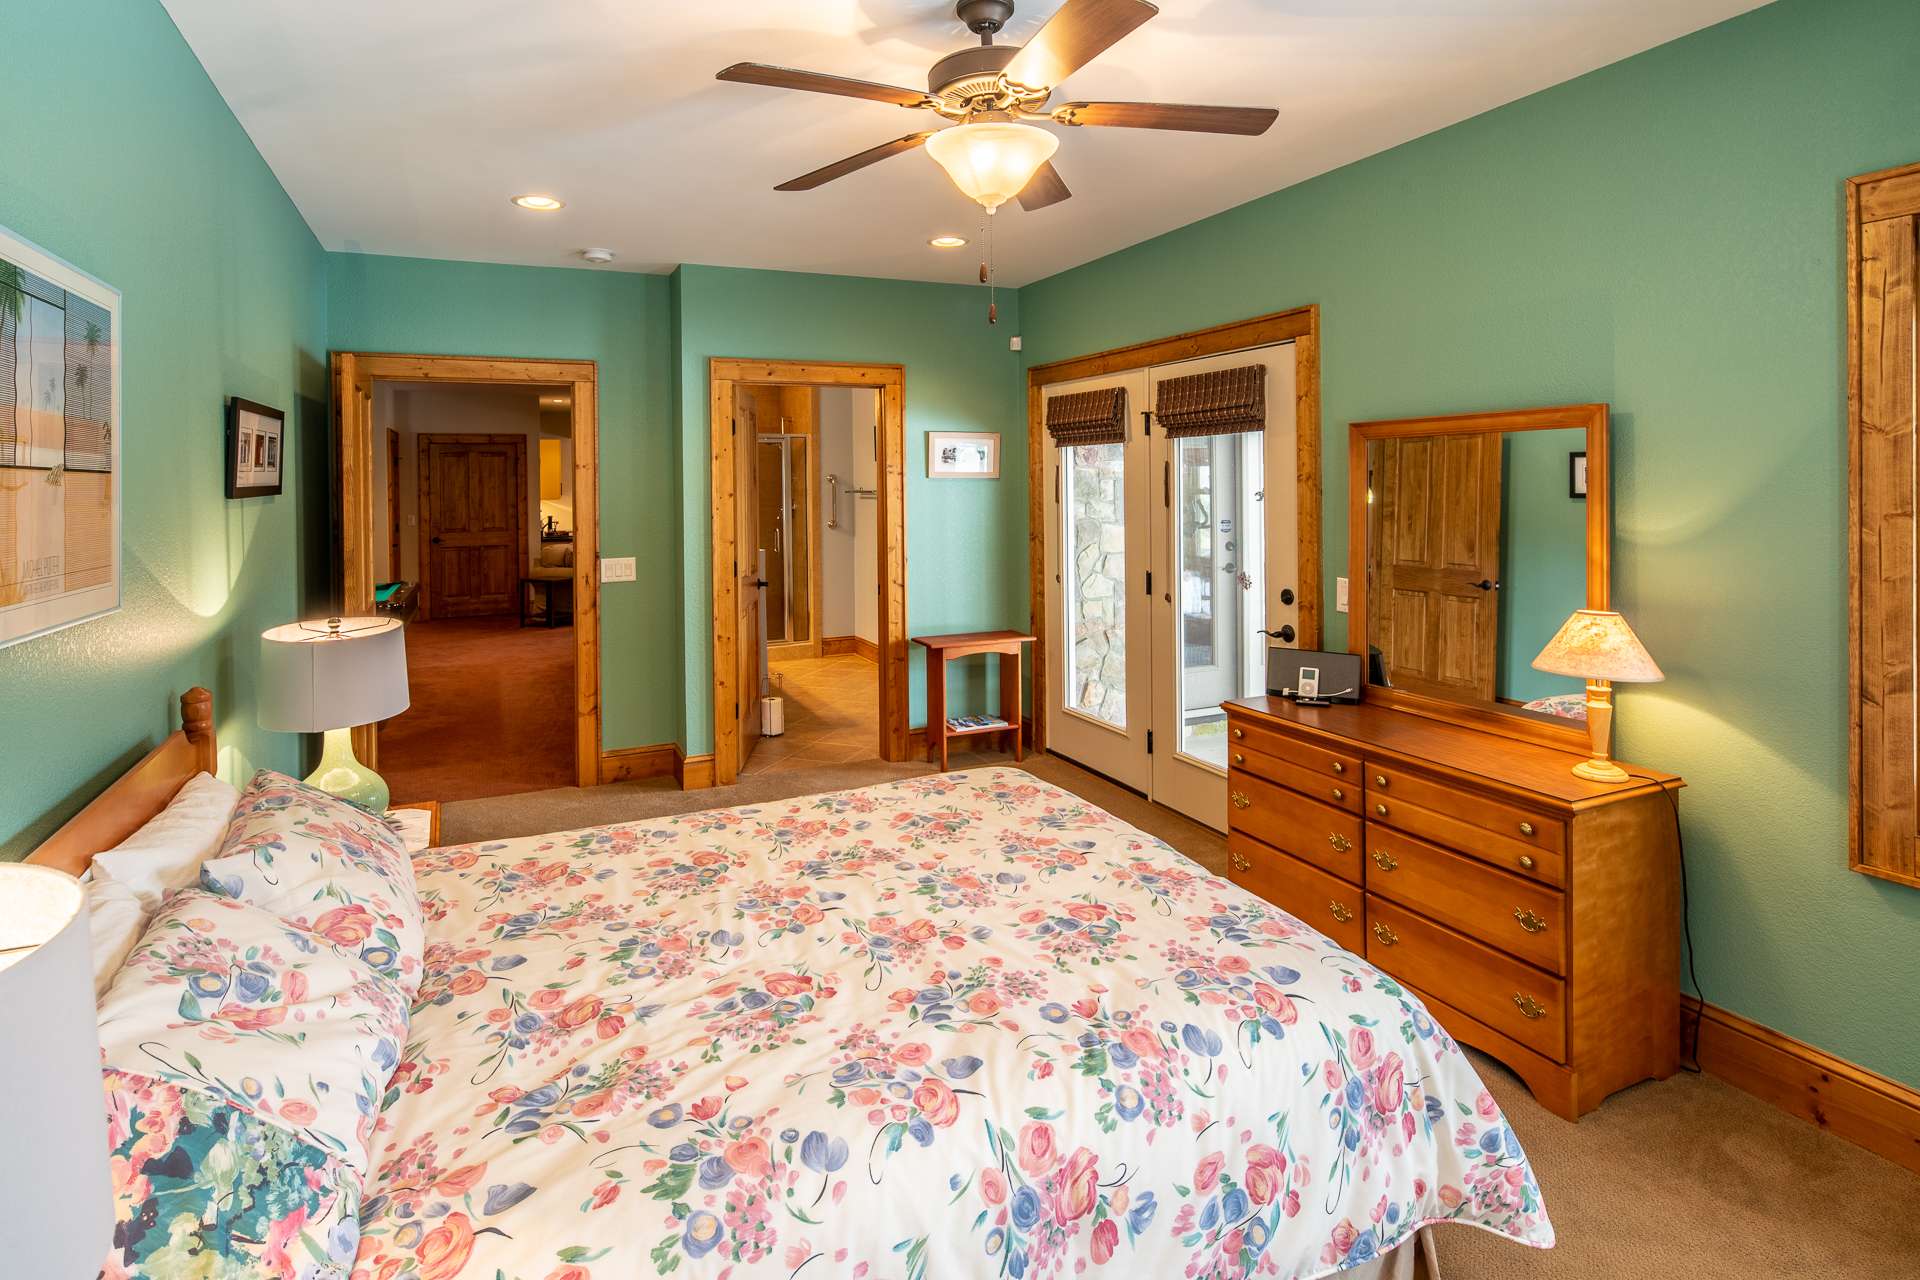 This spacious bedroom offers a private bath and access to the patio.